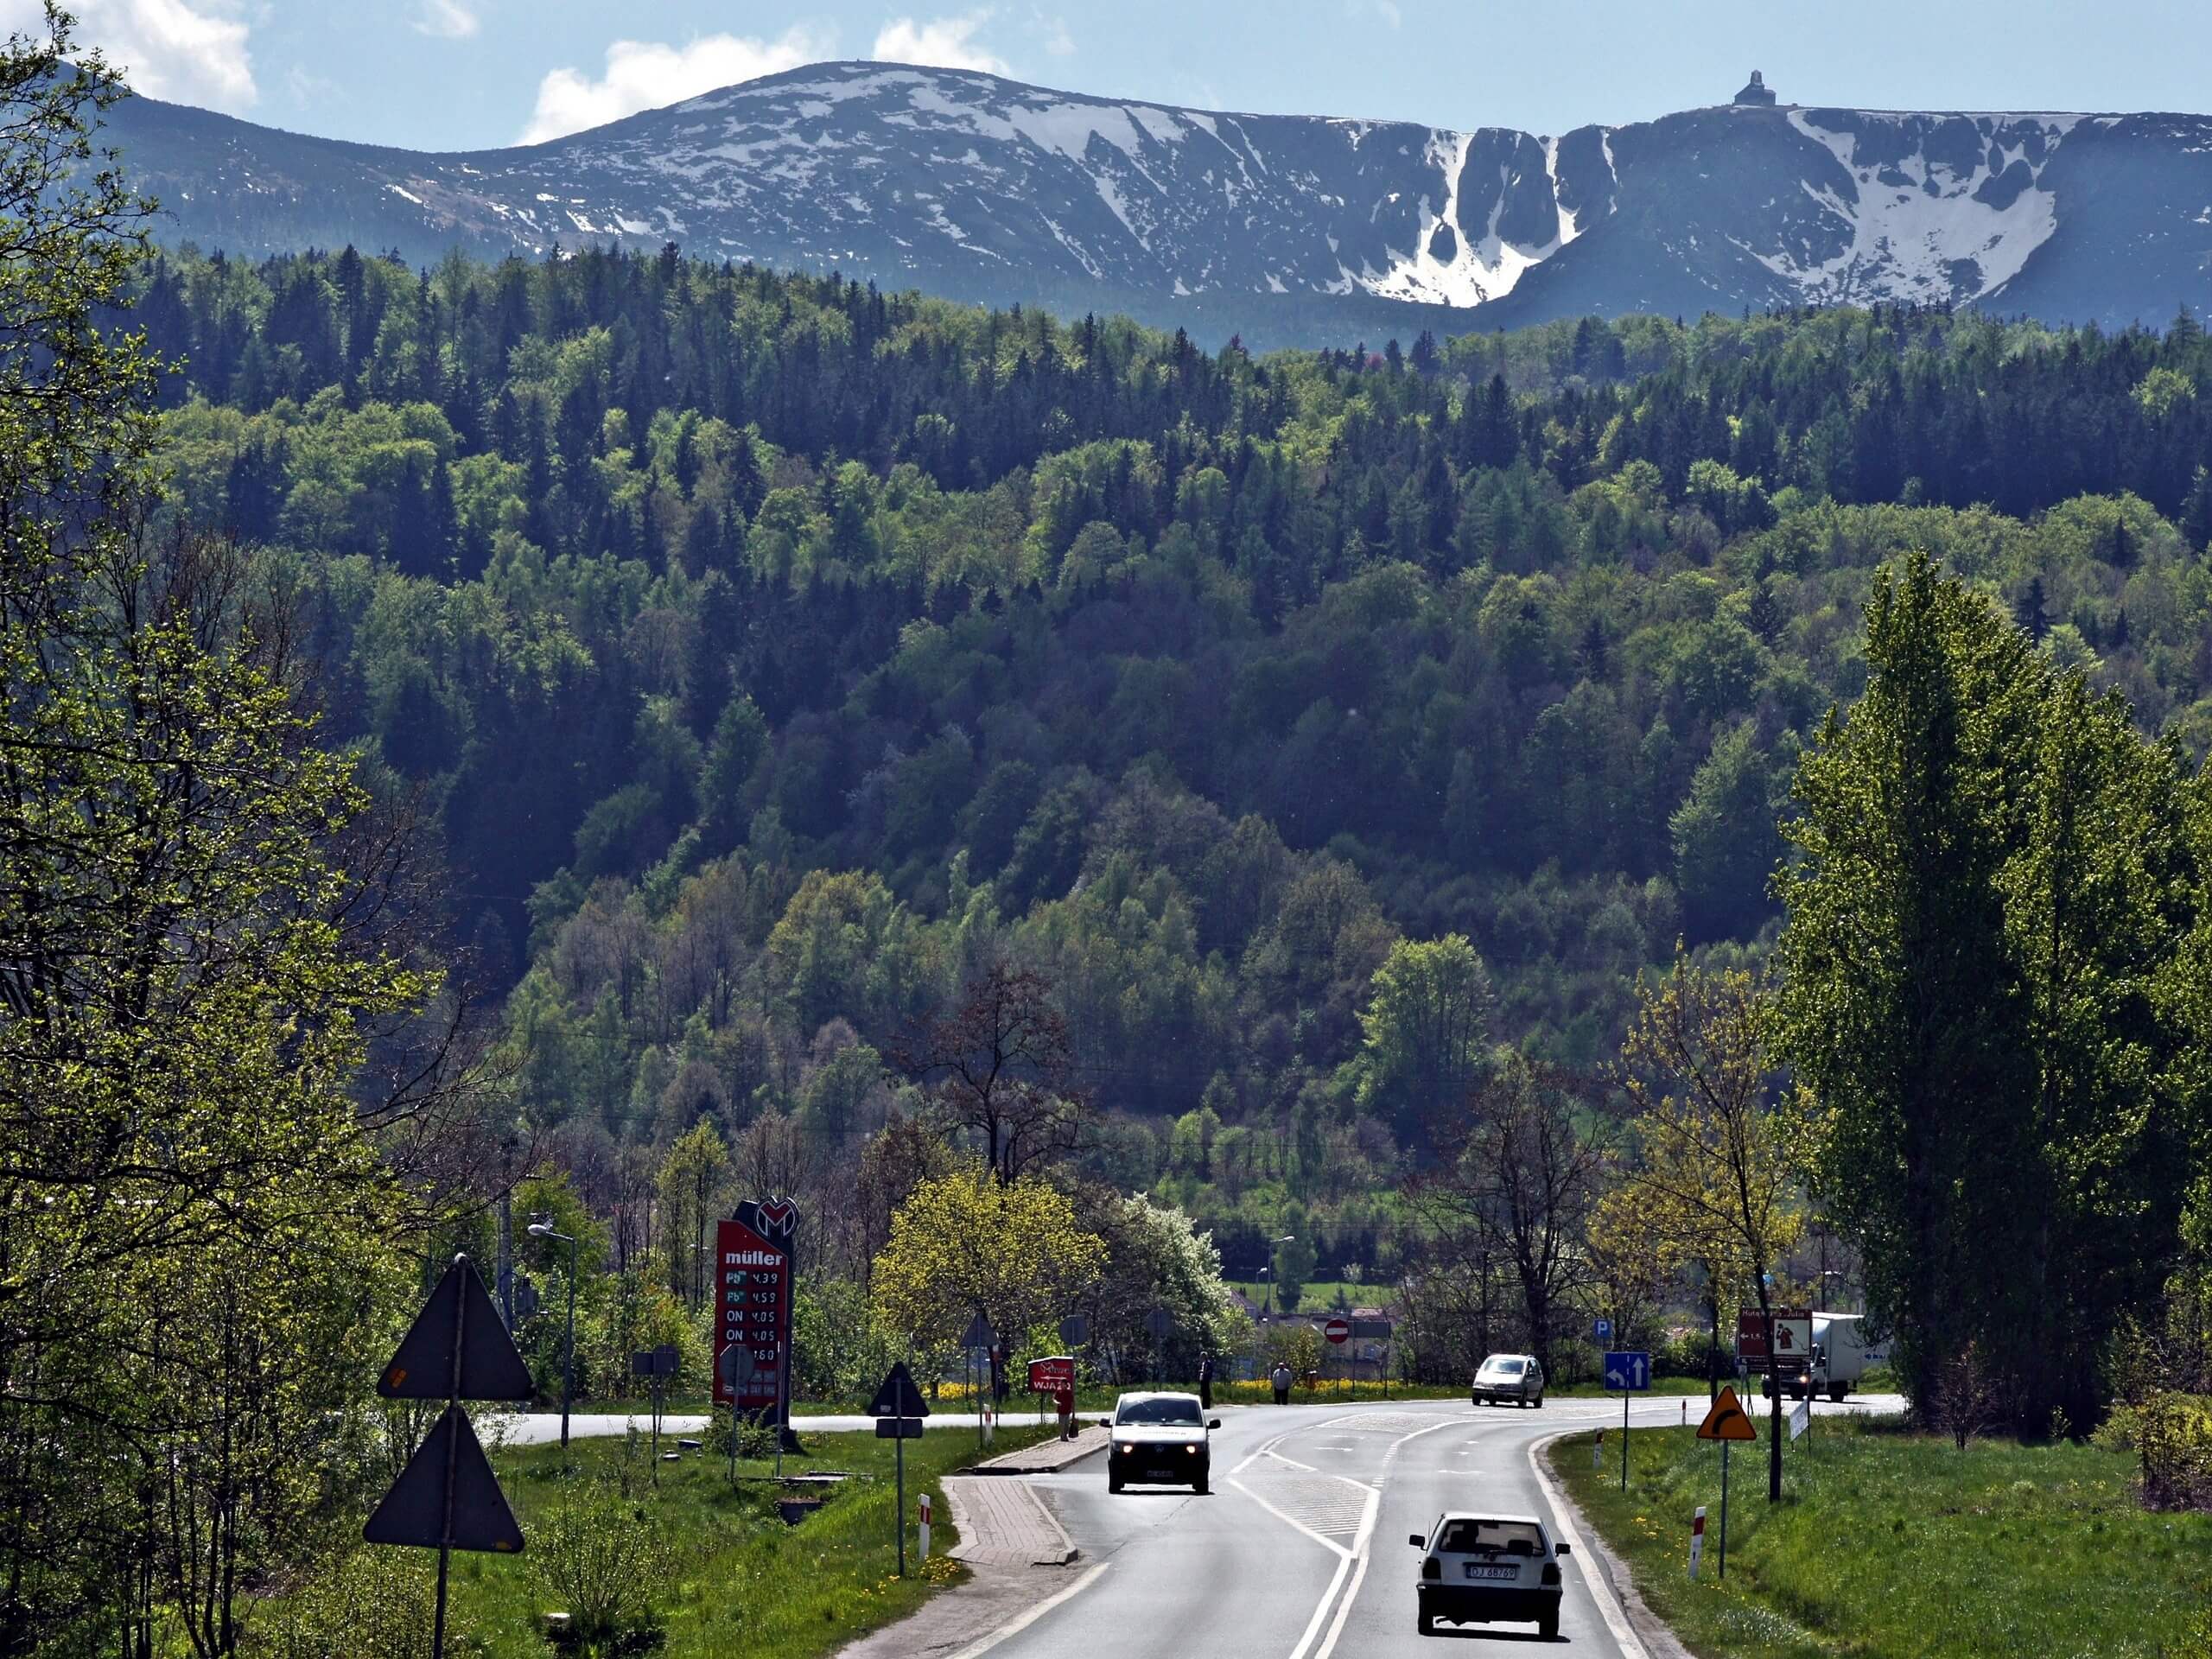 Road in Krknose mountains